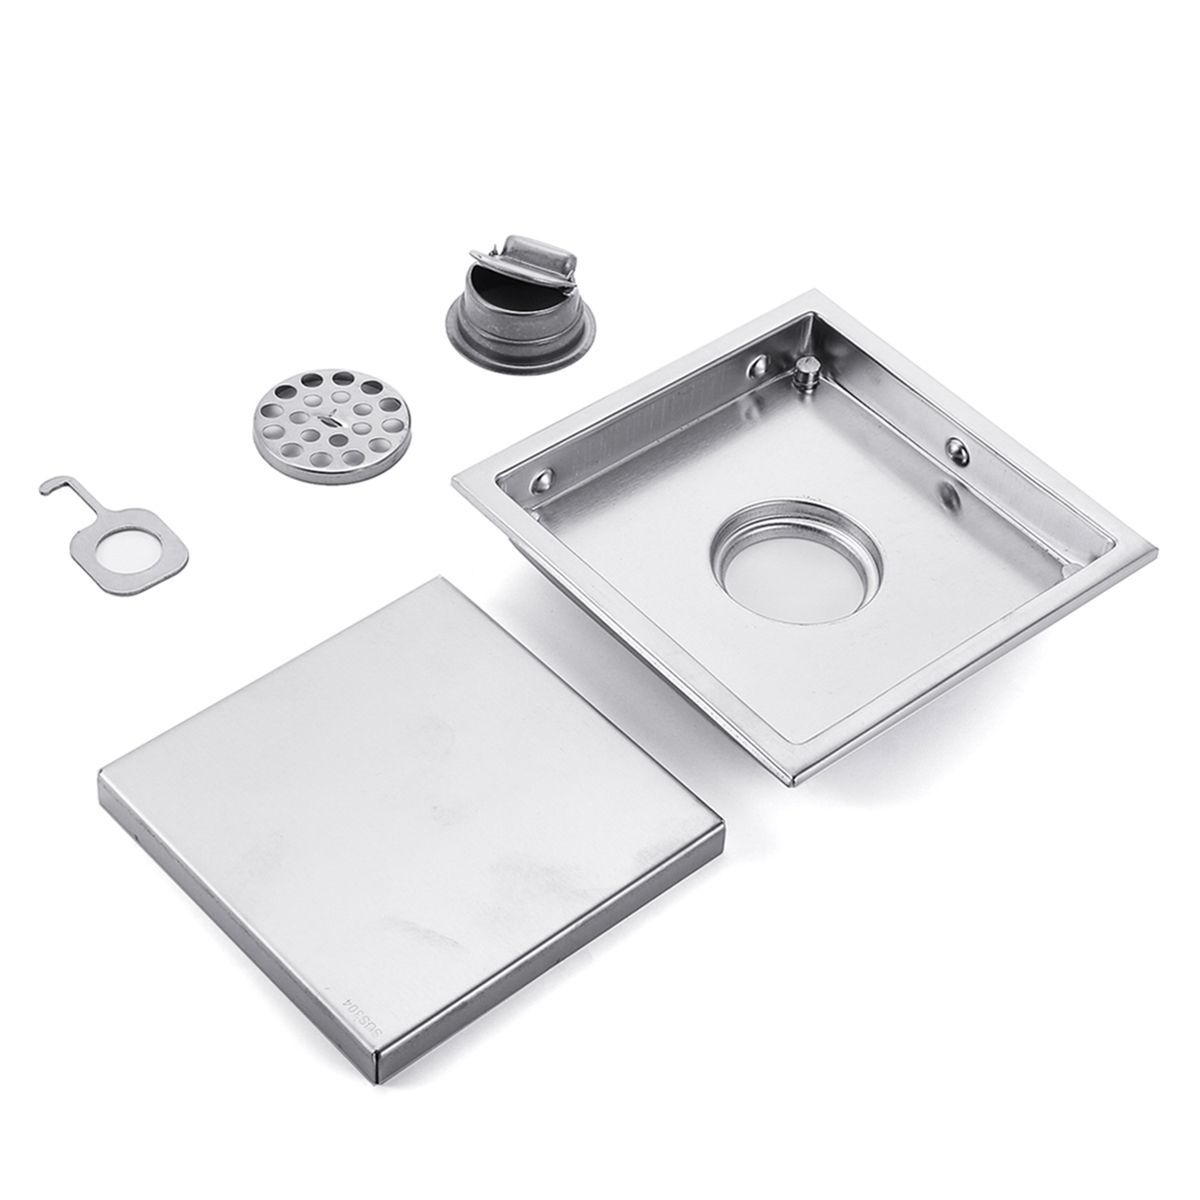 6-Inch-Brushed-Stainless-Steel-Insert-Drain-Wet-Invisible-Bathroom-Square-Shower-Floor-Grate-Tile-1316184